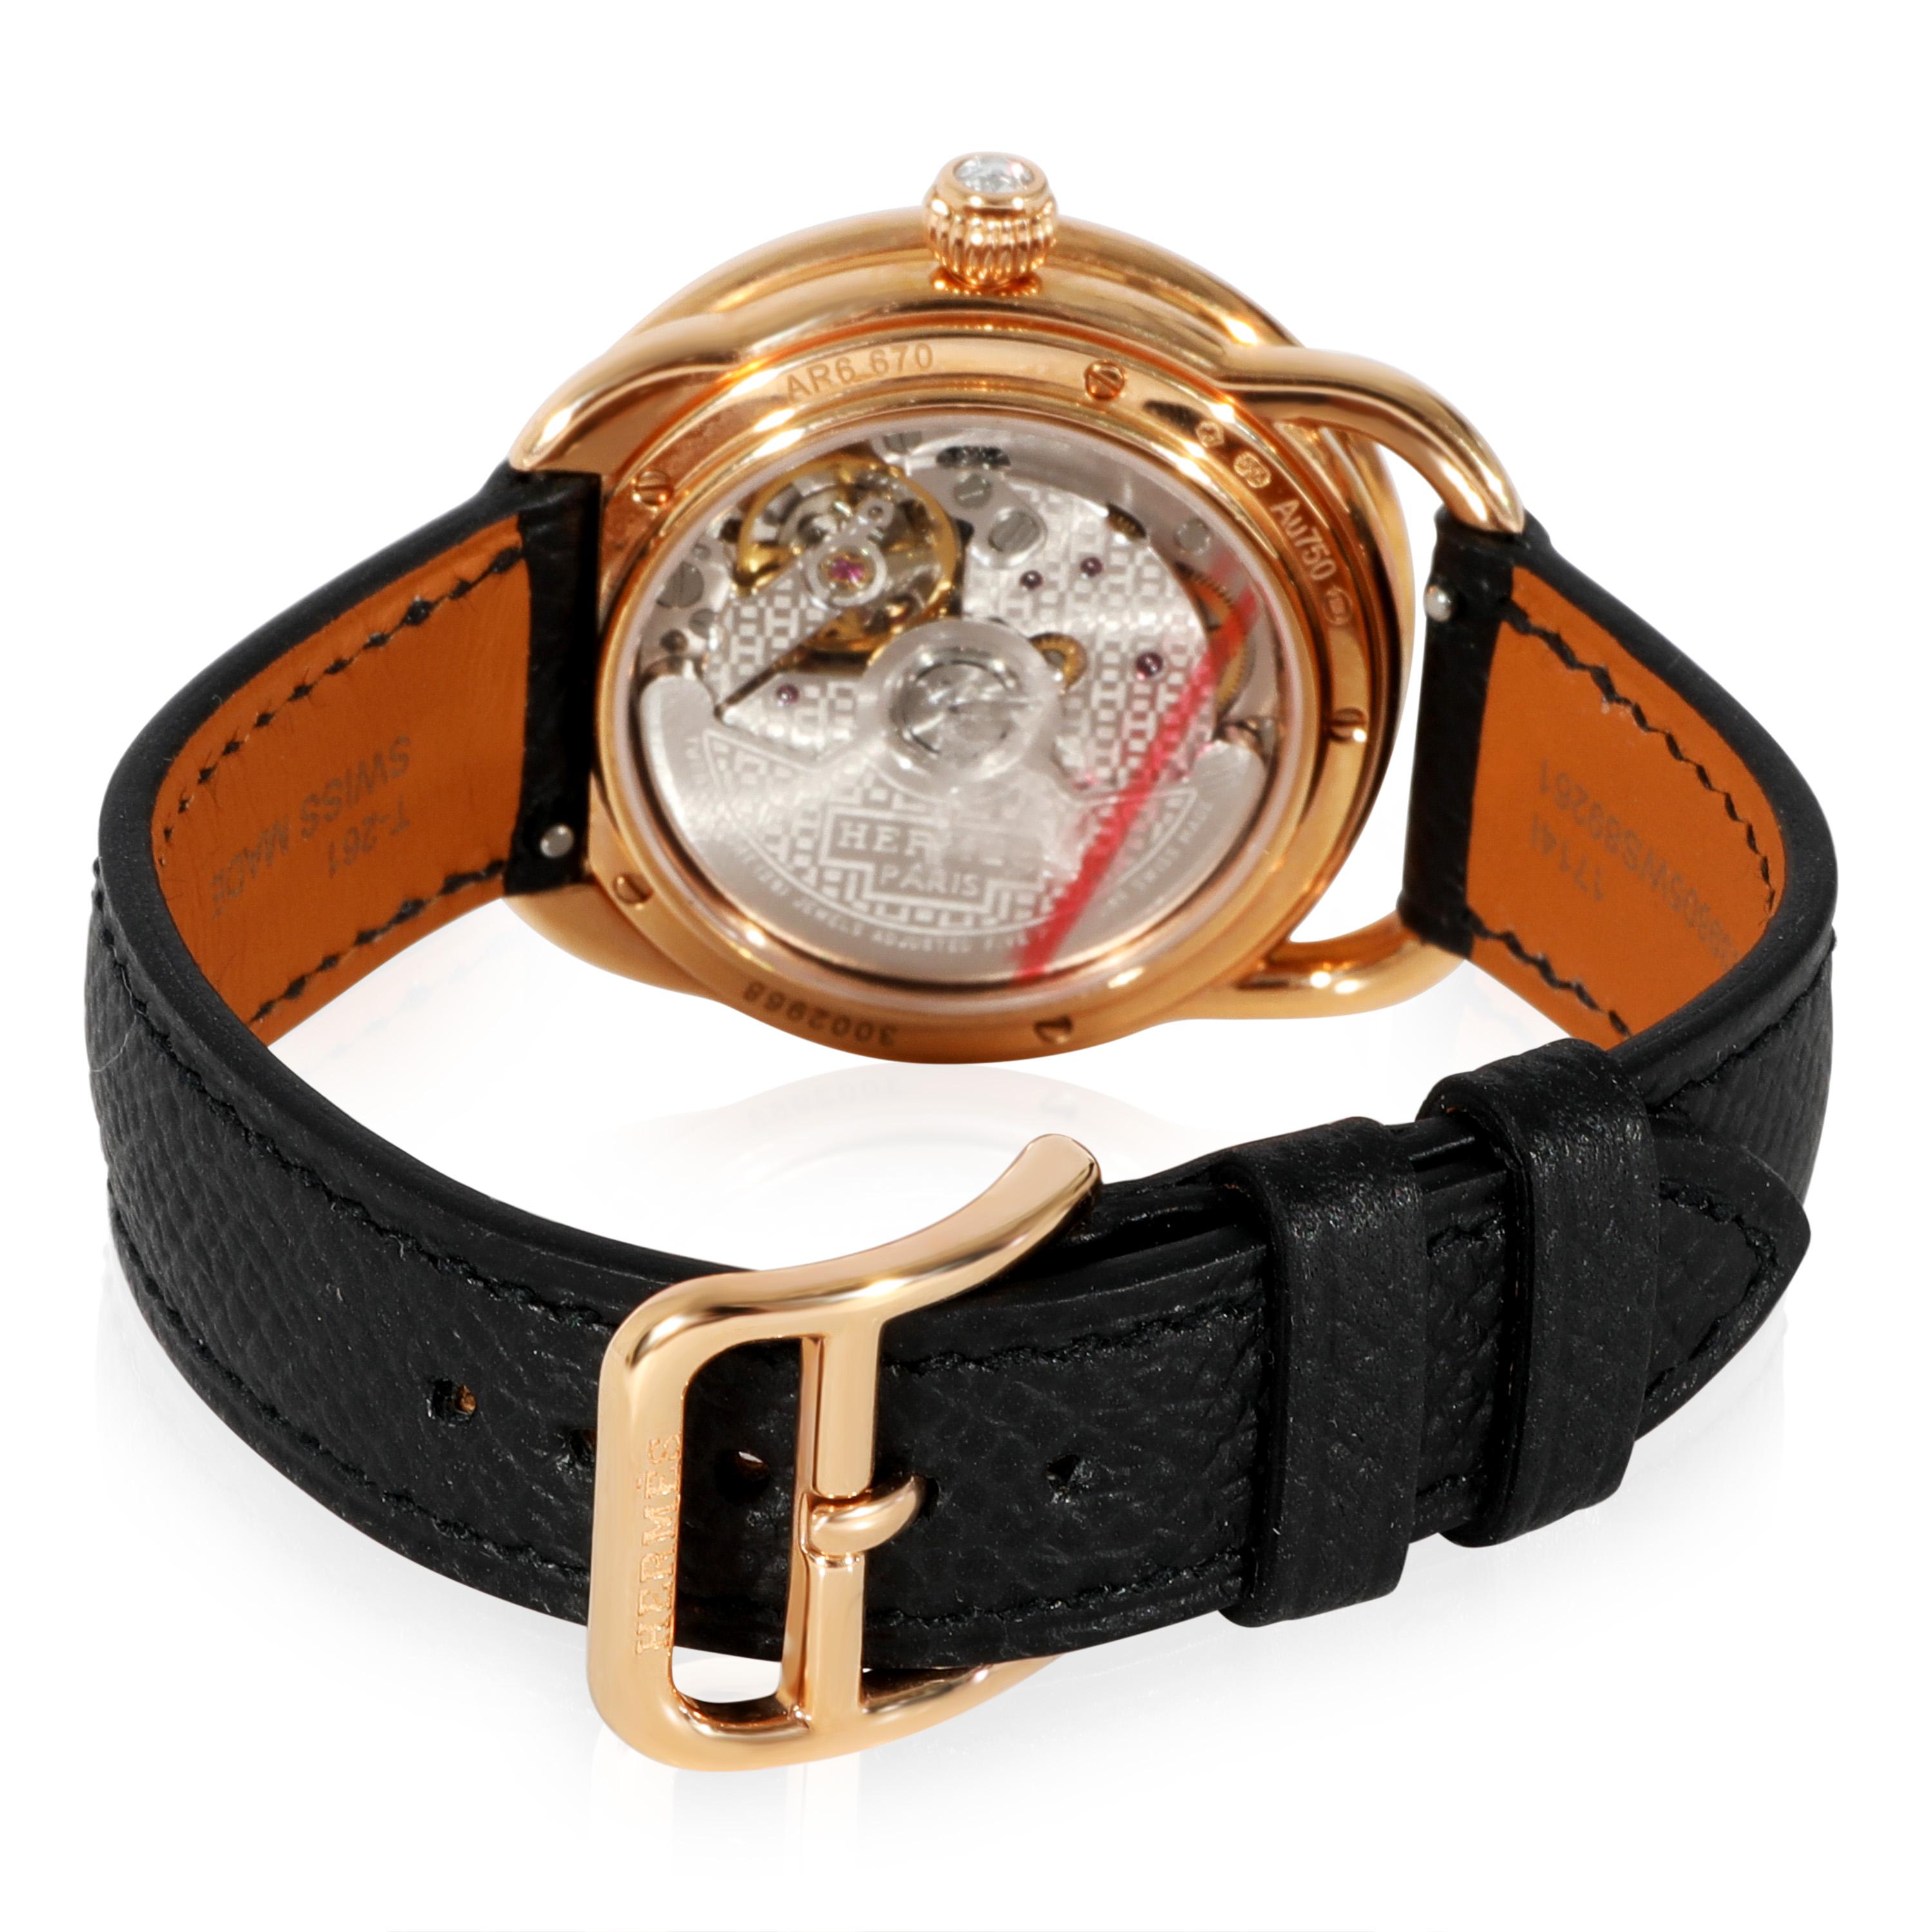 Hermès Arceau Ecuyere AR6.670.221.MN0 Unisex Watch in 18kt Rose Gold In New Condition For Sale In New York, NY